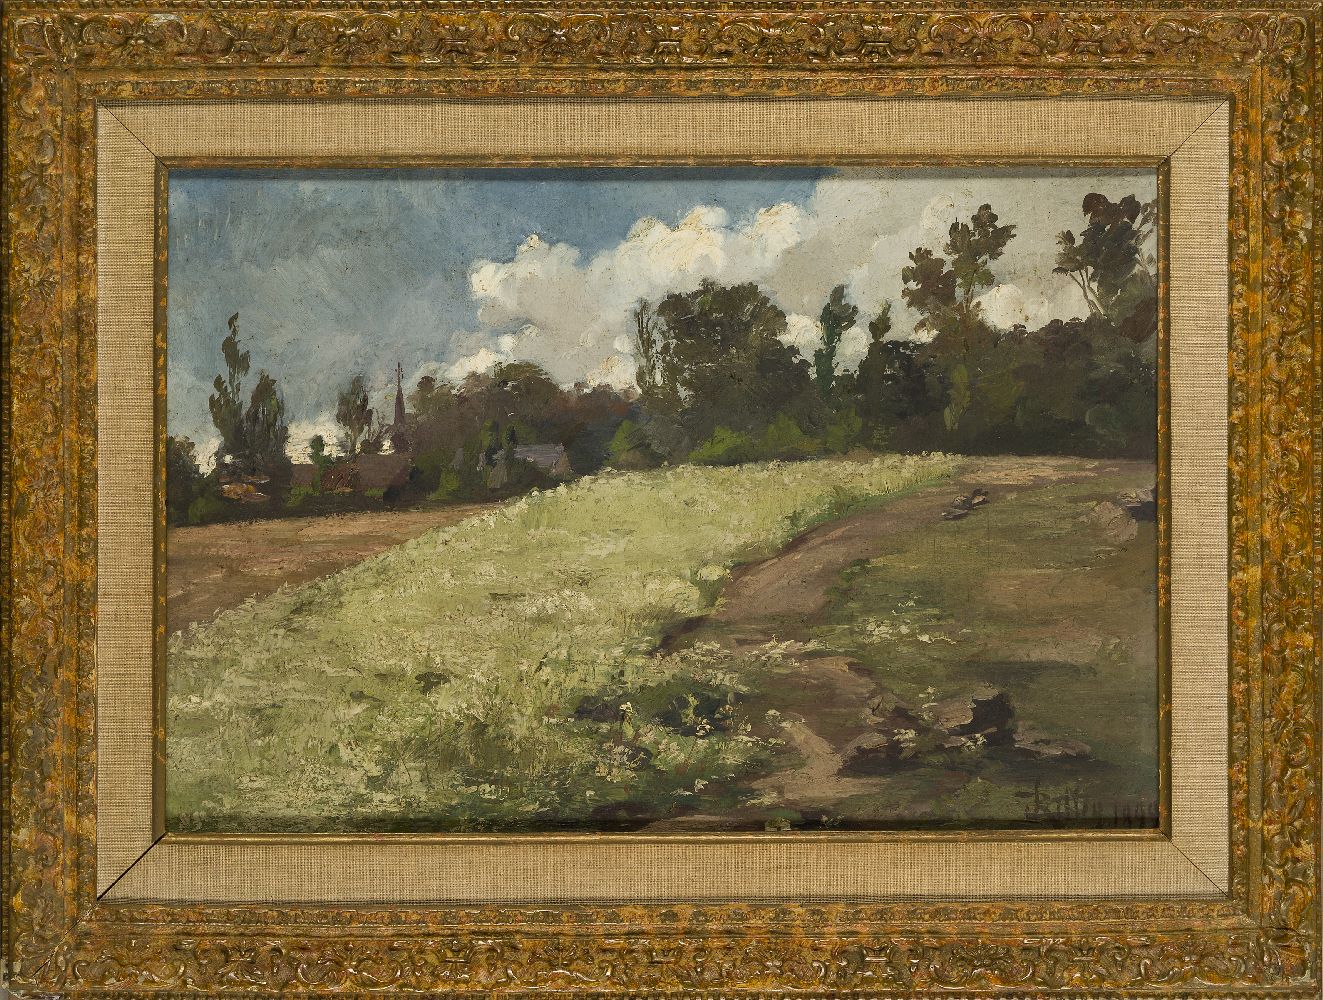 John Rettig, America 1858-1932- Landscape, 1899; oil on canvas, signed and date 1899 lower right; - Image 2 of 3